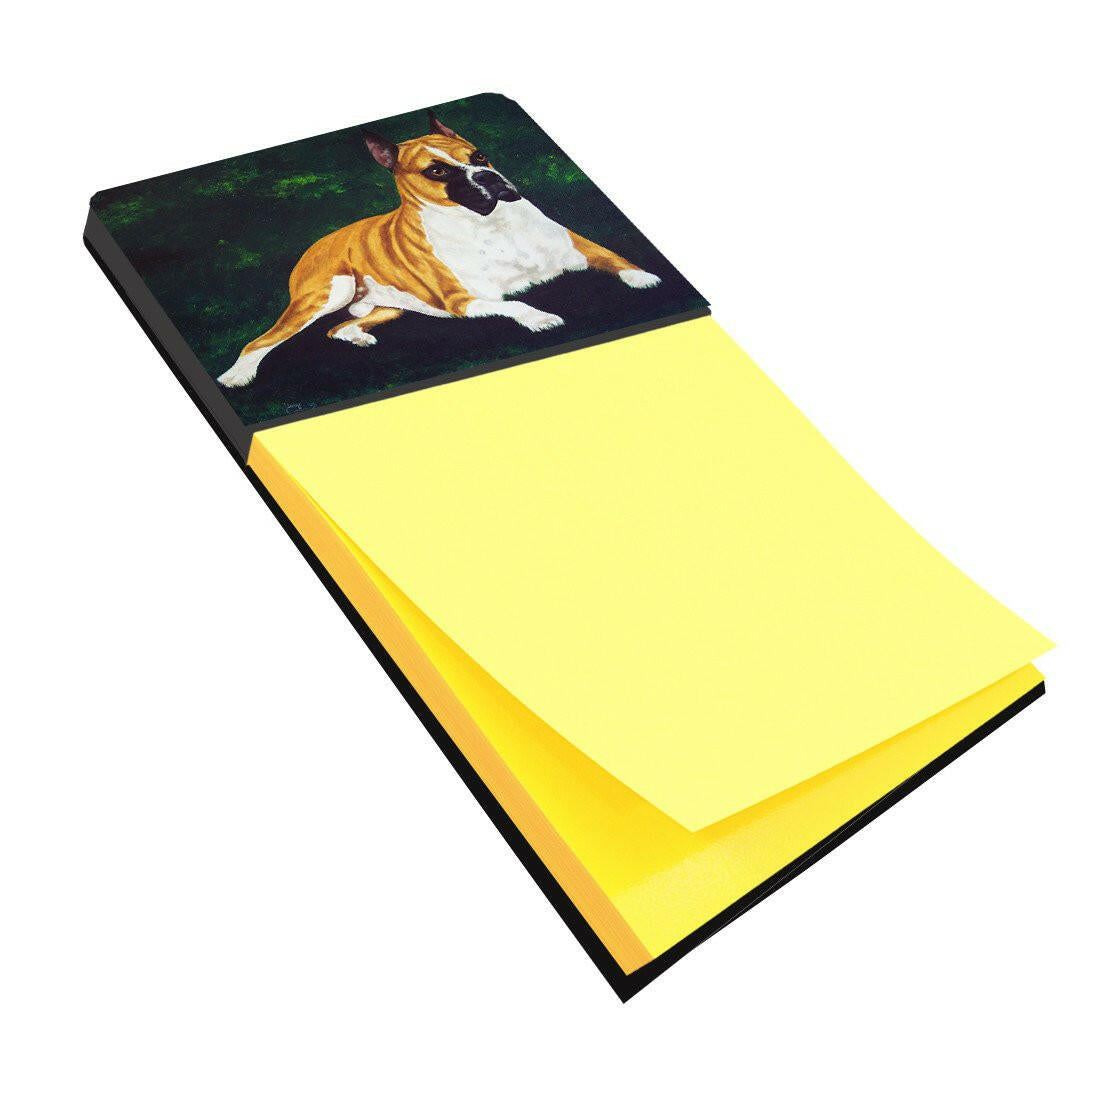 Dempsey Boxer Sticky Note Holder AMB1064SN by Caroline's Treasures